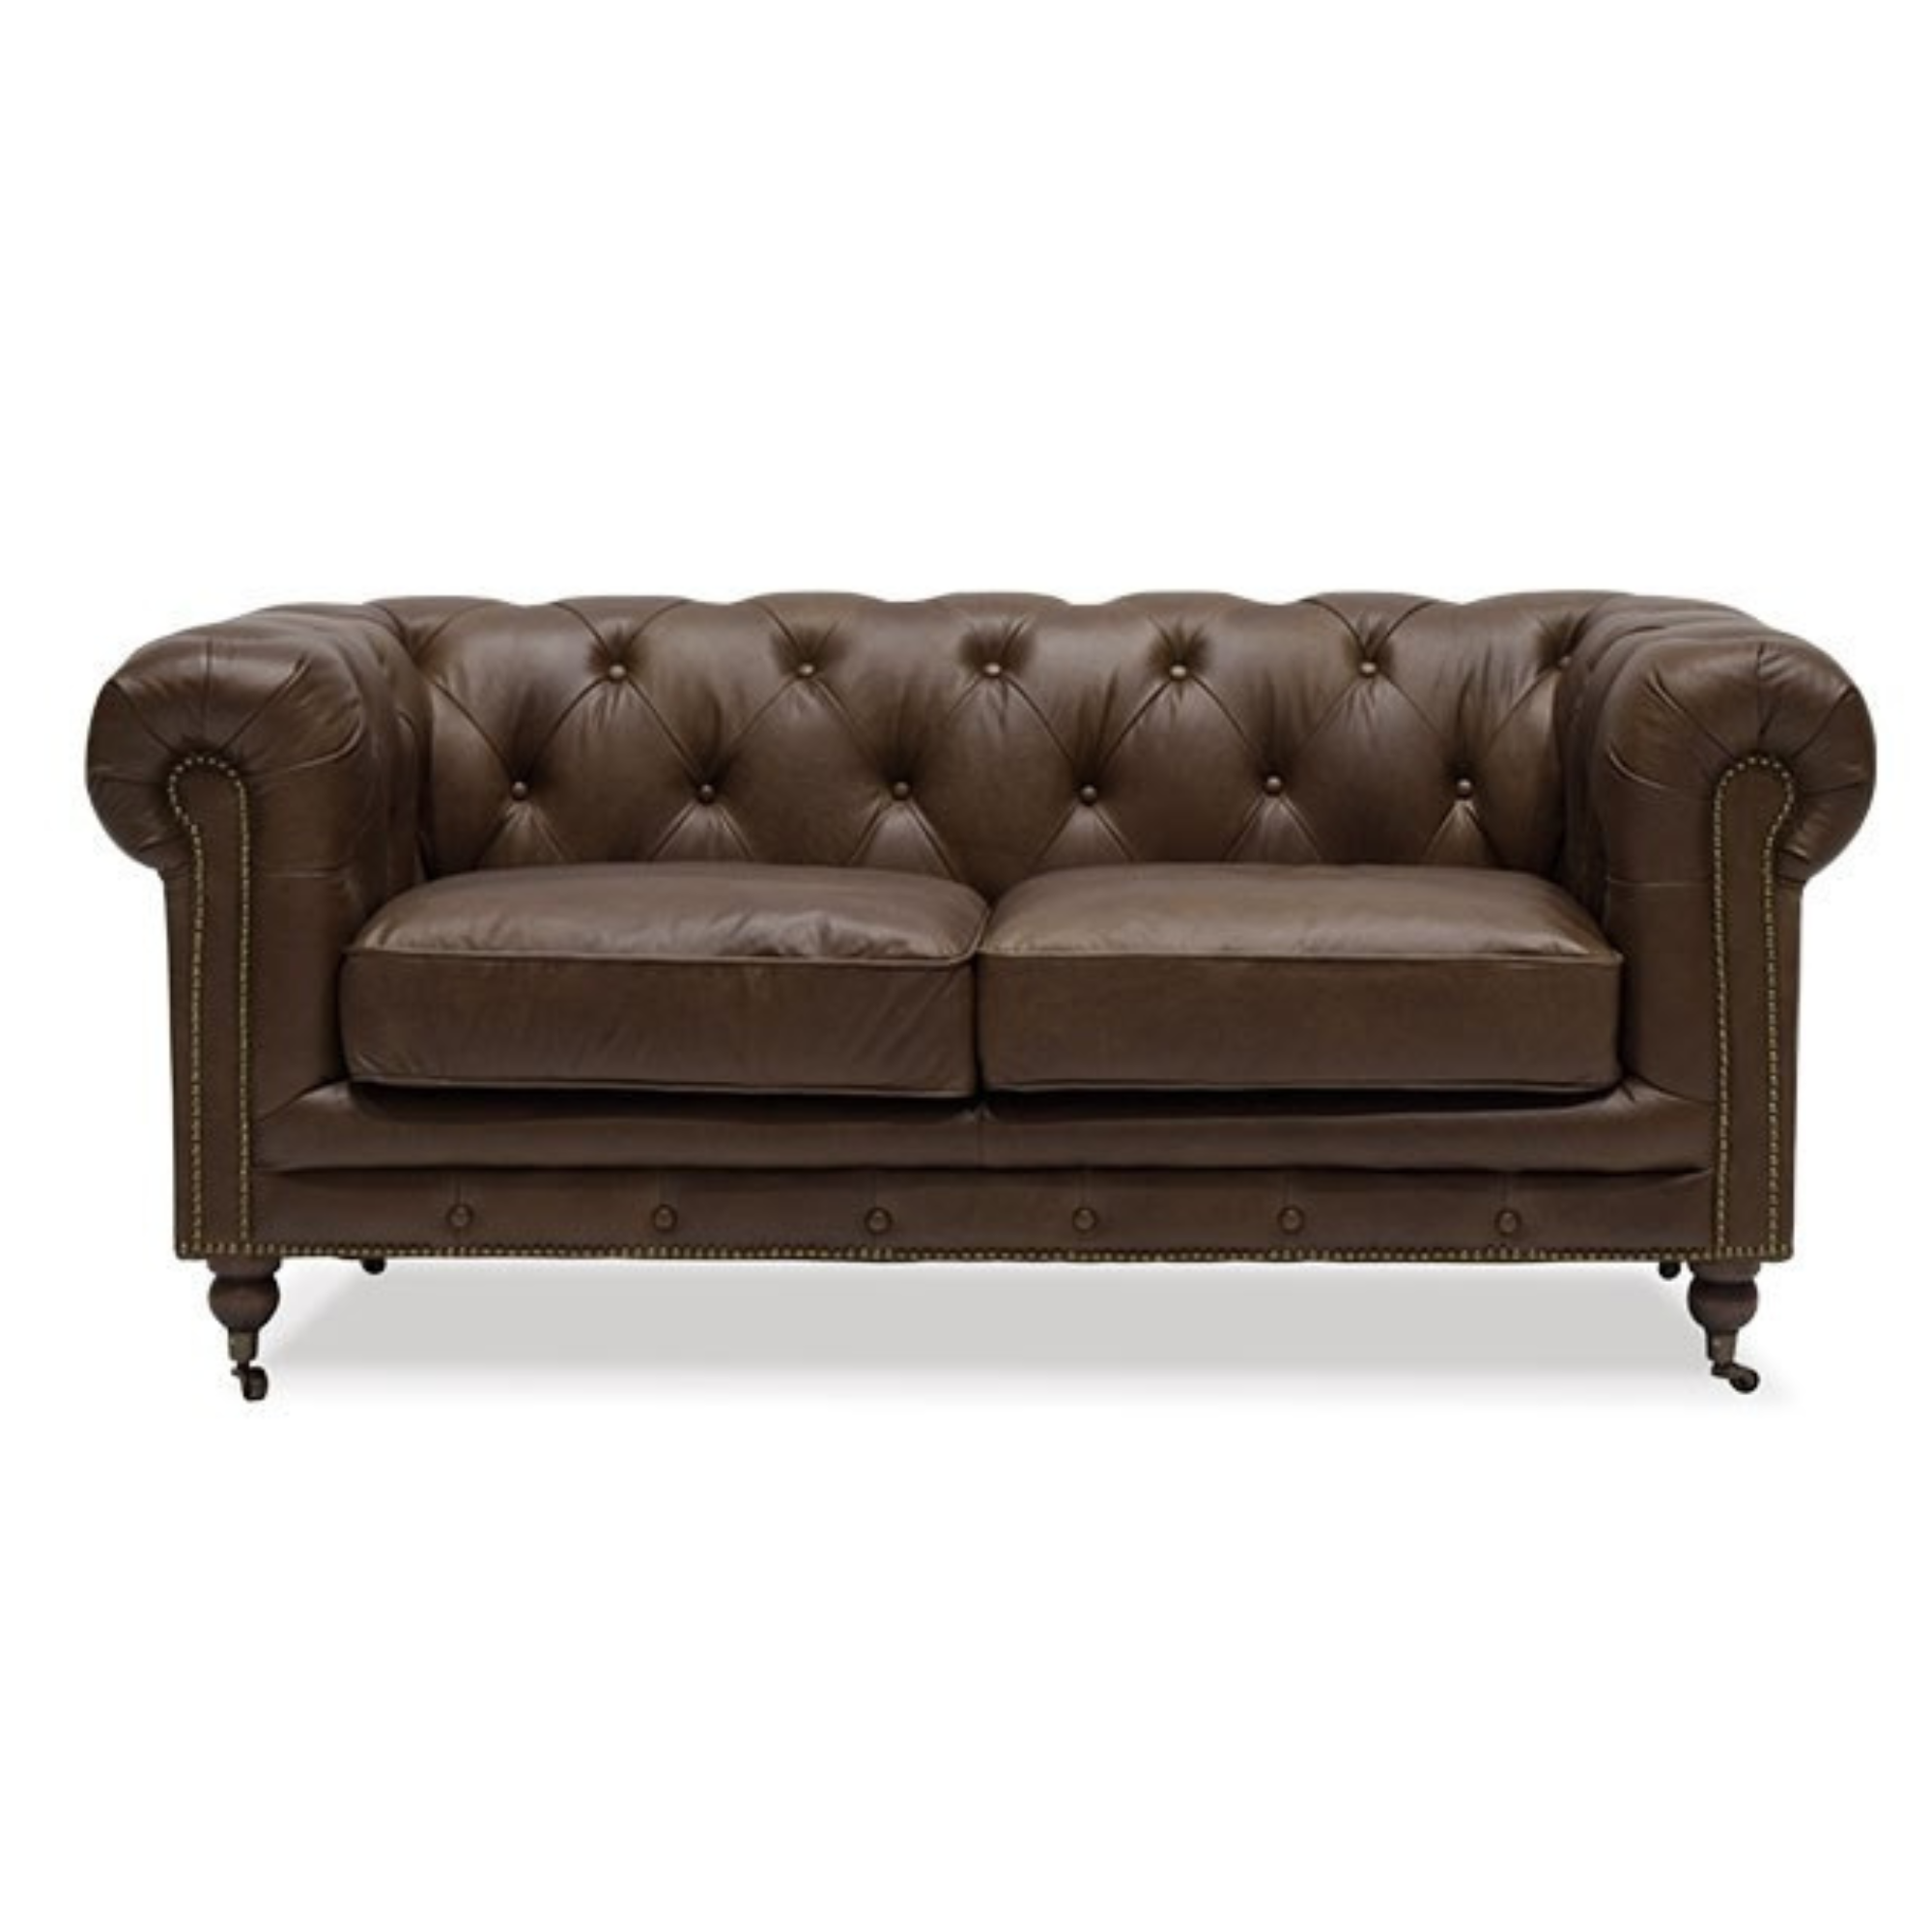 STANHOPE LEATHER 2 SEATER CHESTERFIELD